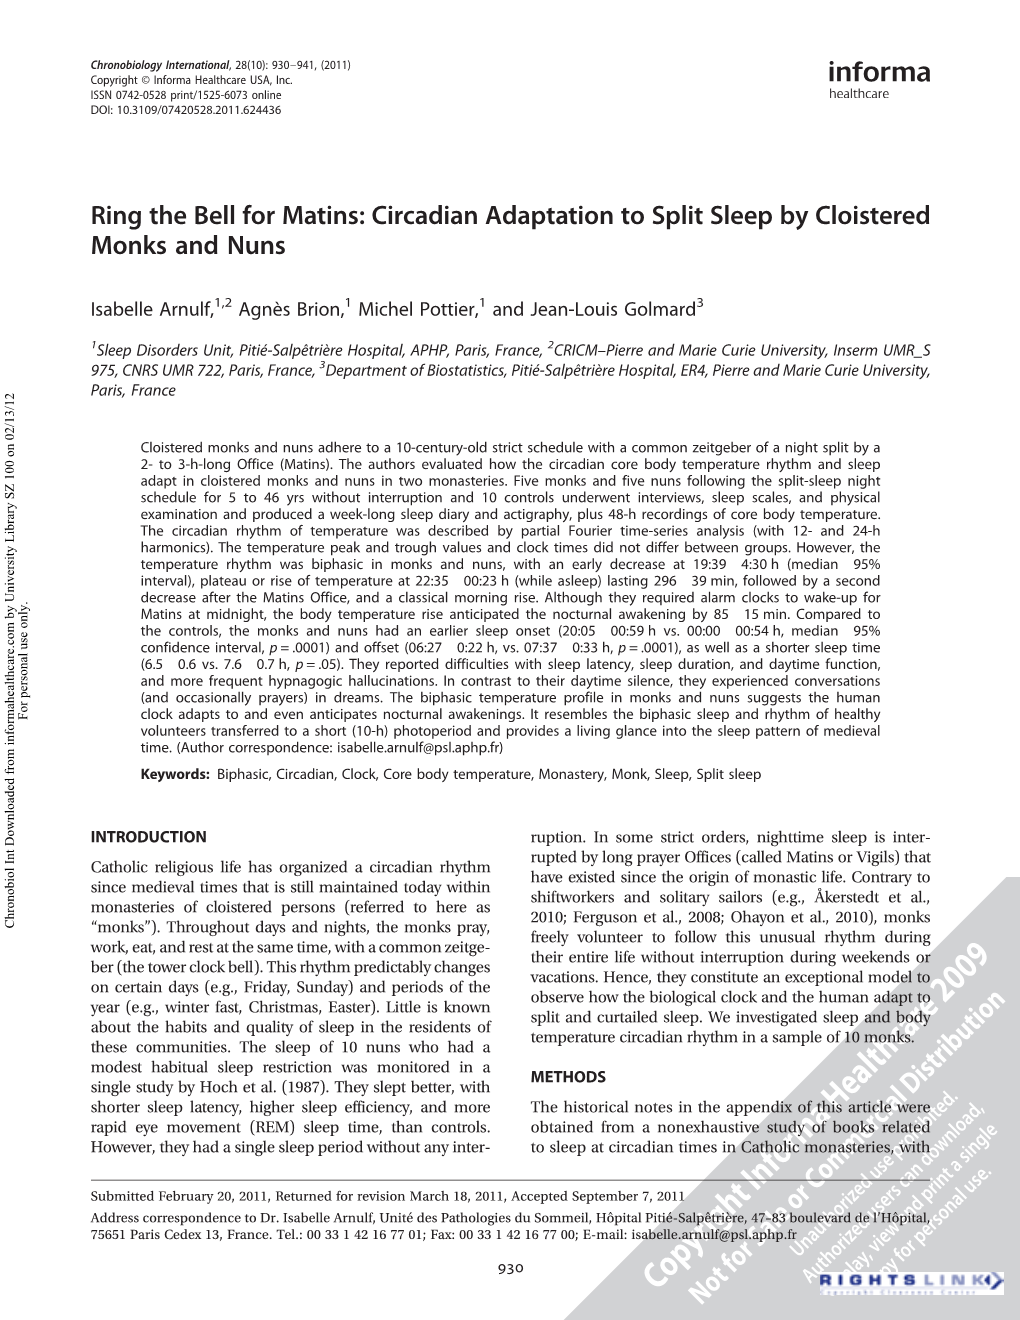 Circadian Adaptation to Split Sleep by Cloistered Monks and Nuns